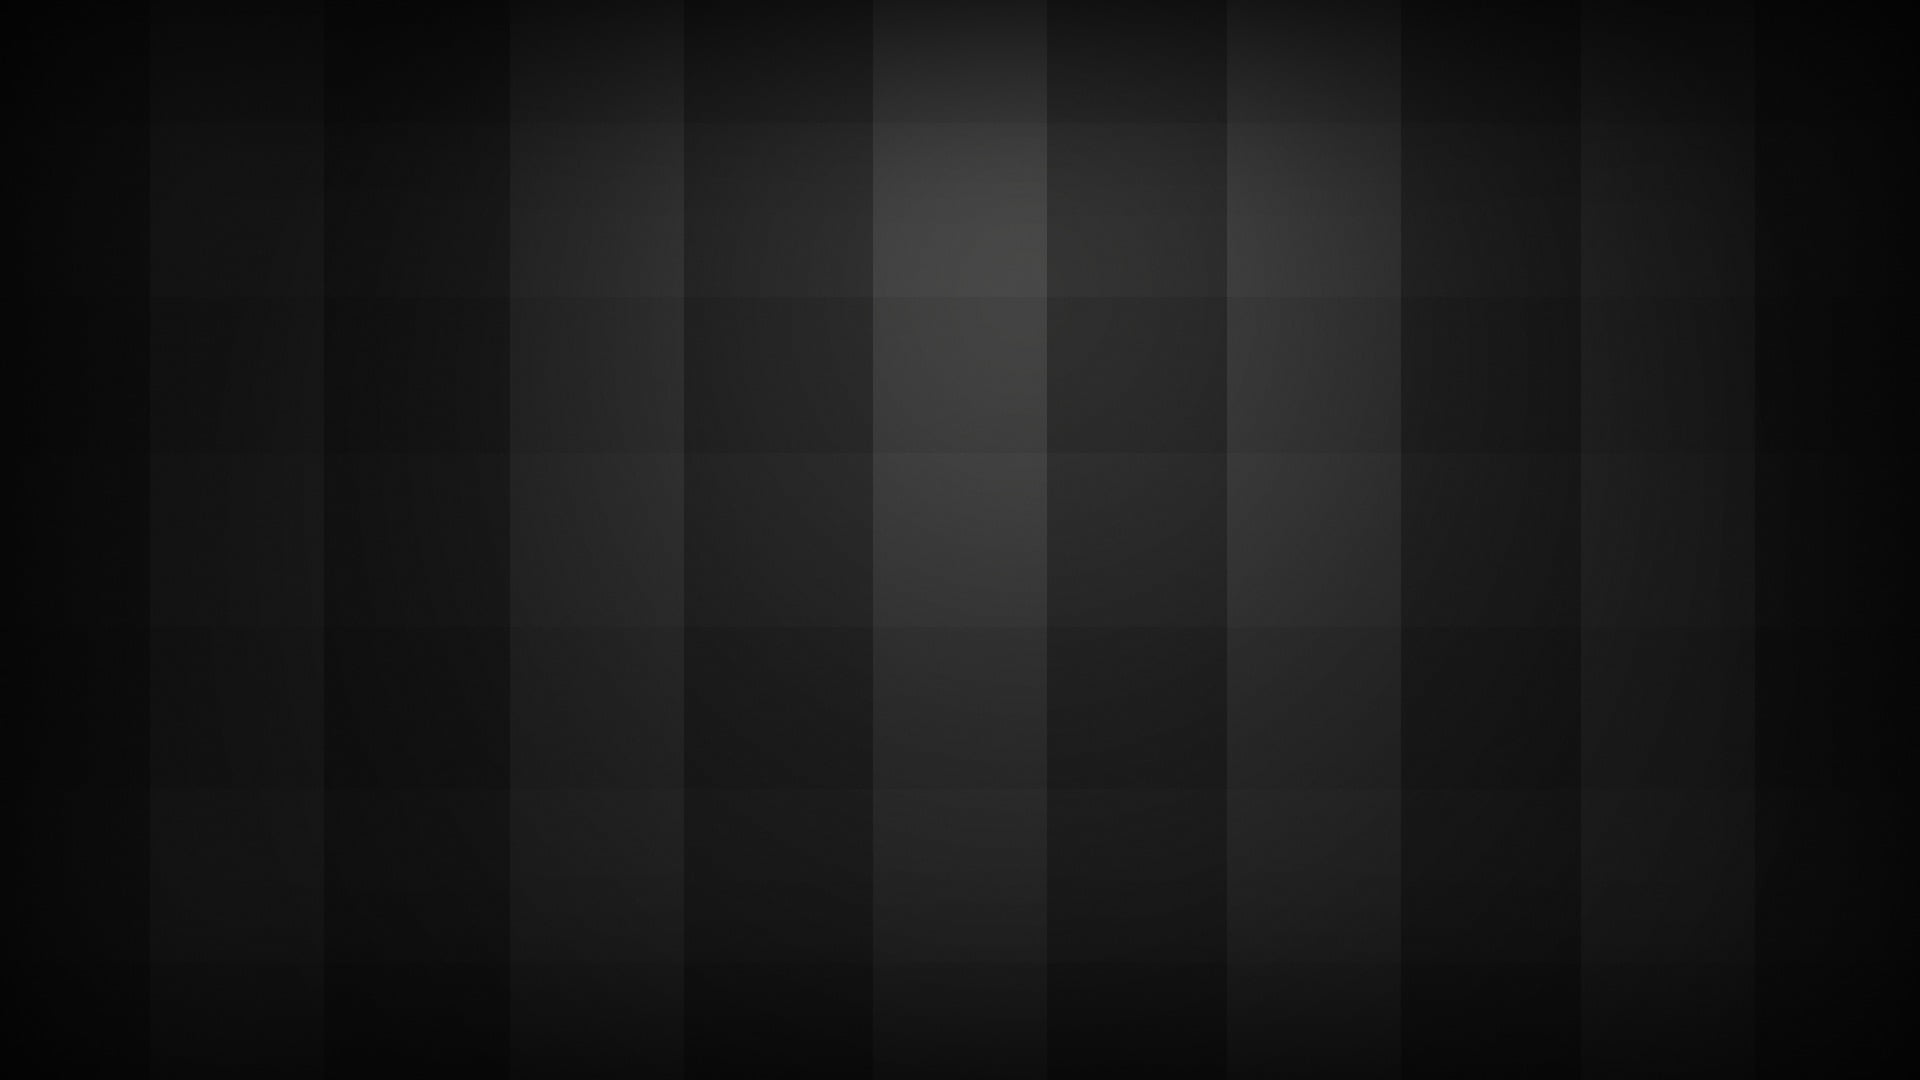 blakc and gray plaid background wallpaper, color, texture, cell